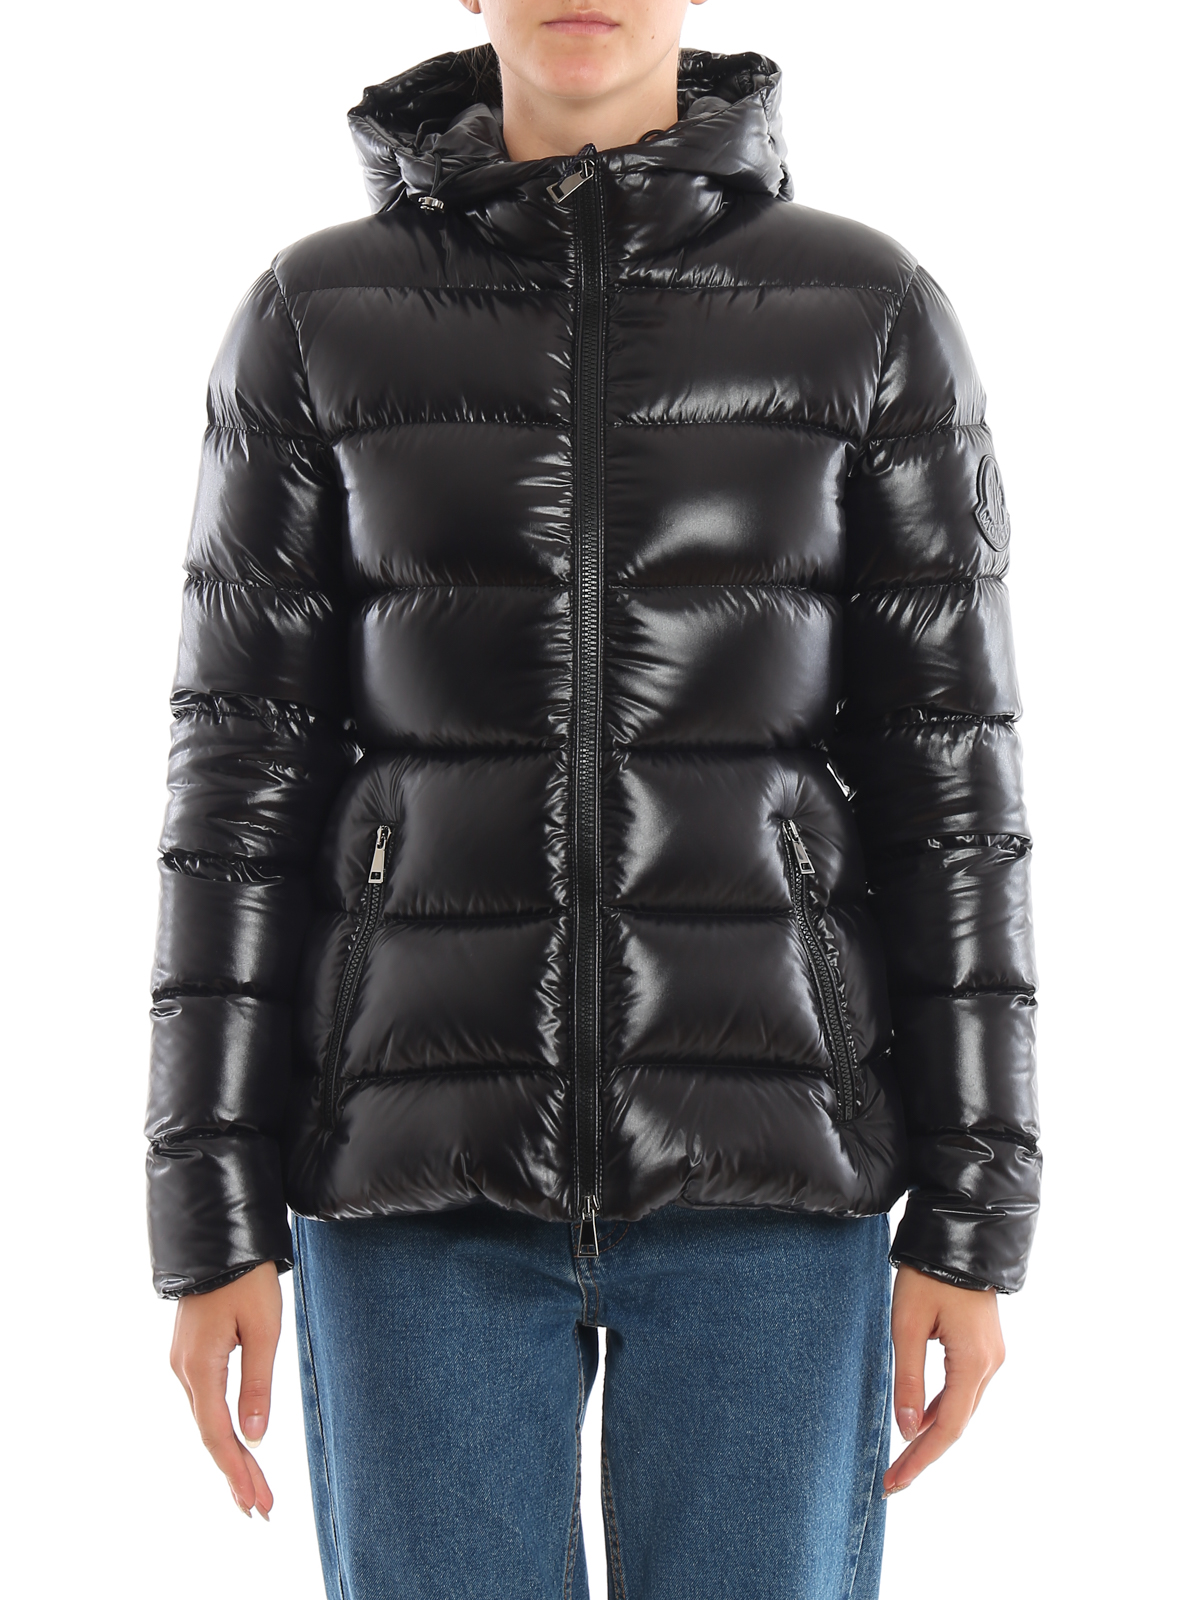 Rhin black quilted puffer jacket 